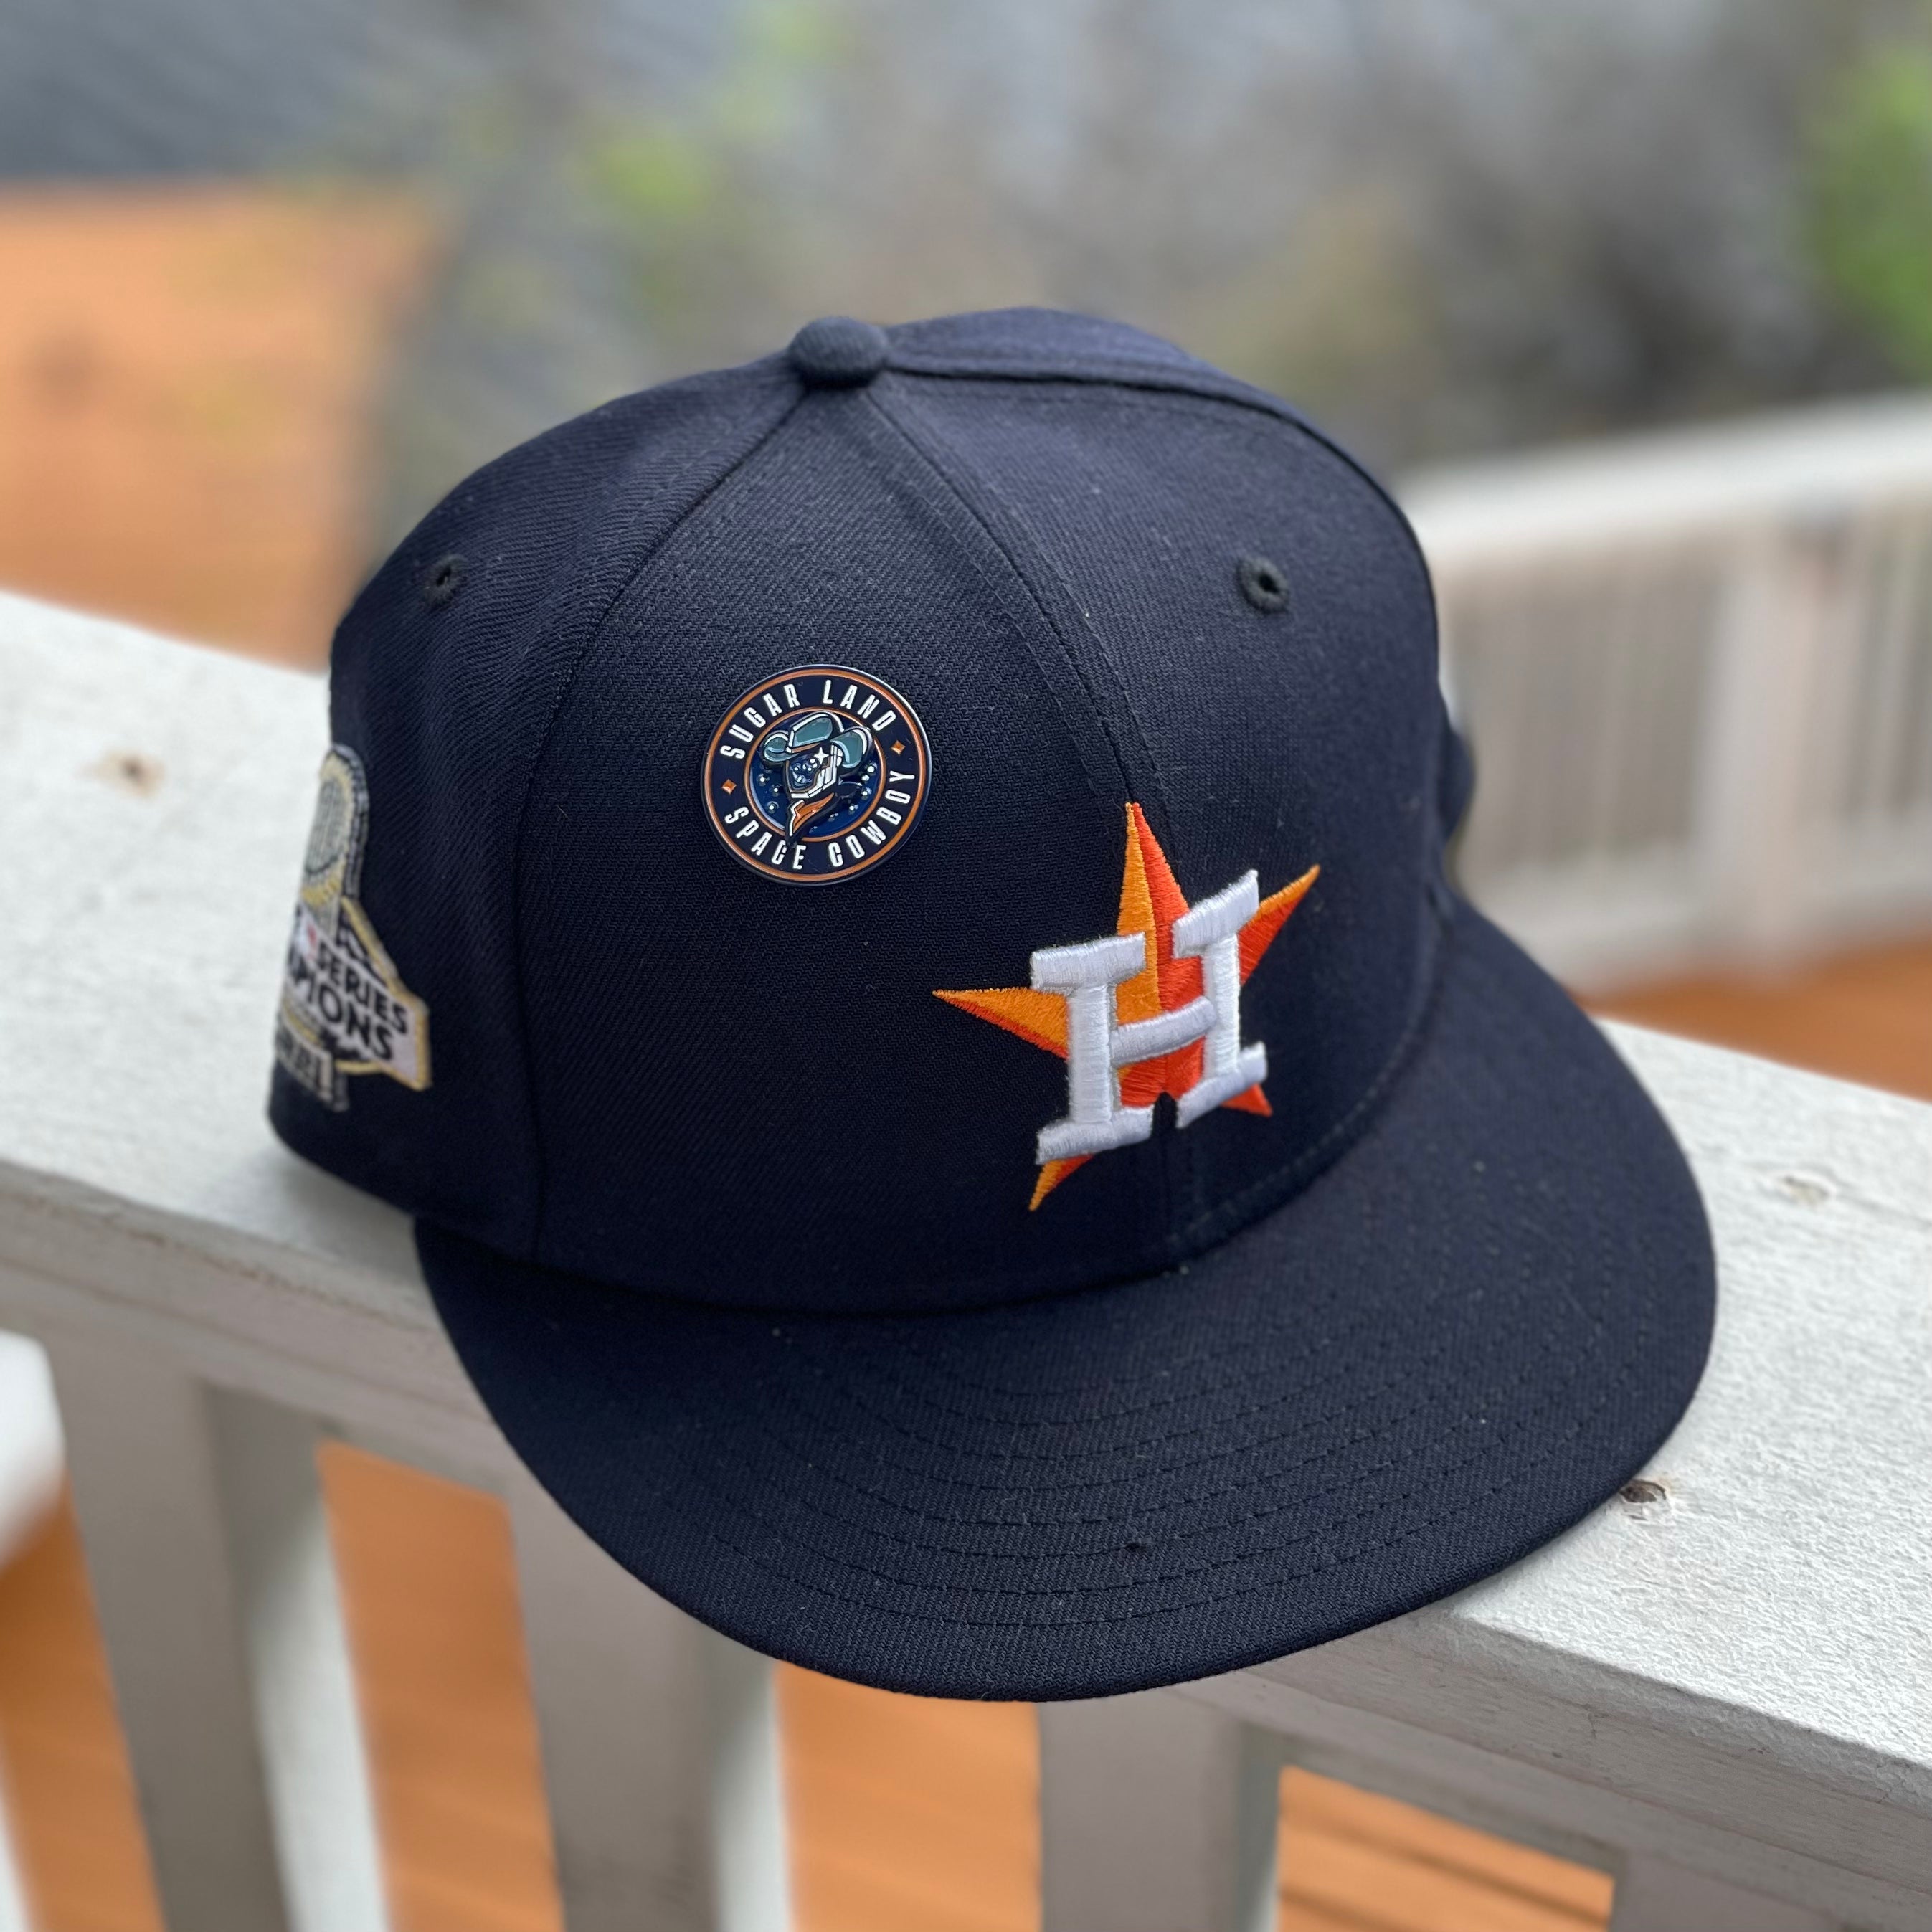 Pin by 𝓒𝓸𝓵𝓵𝓮𝓬𝓽𝓸𝓻. on Houston Astros Baseball.